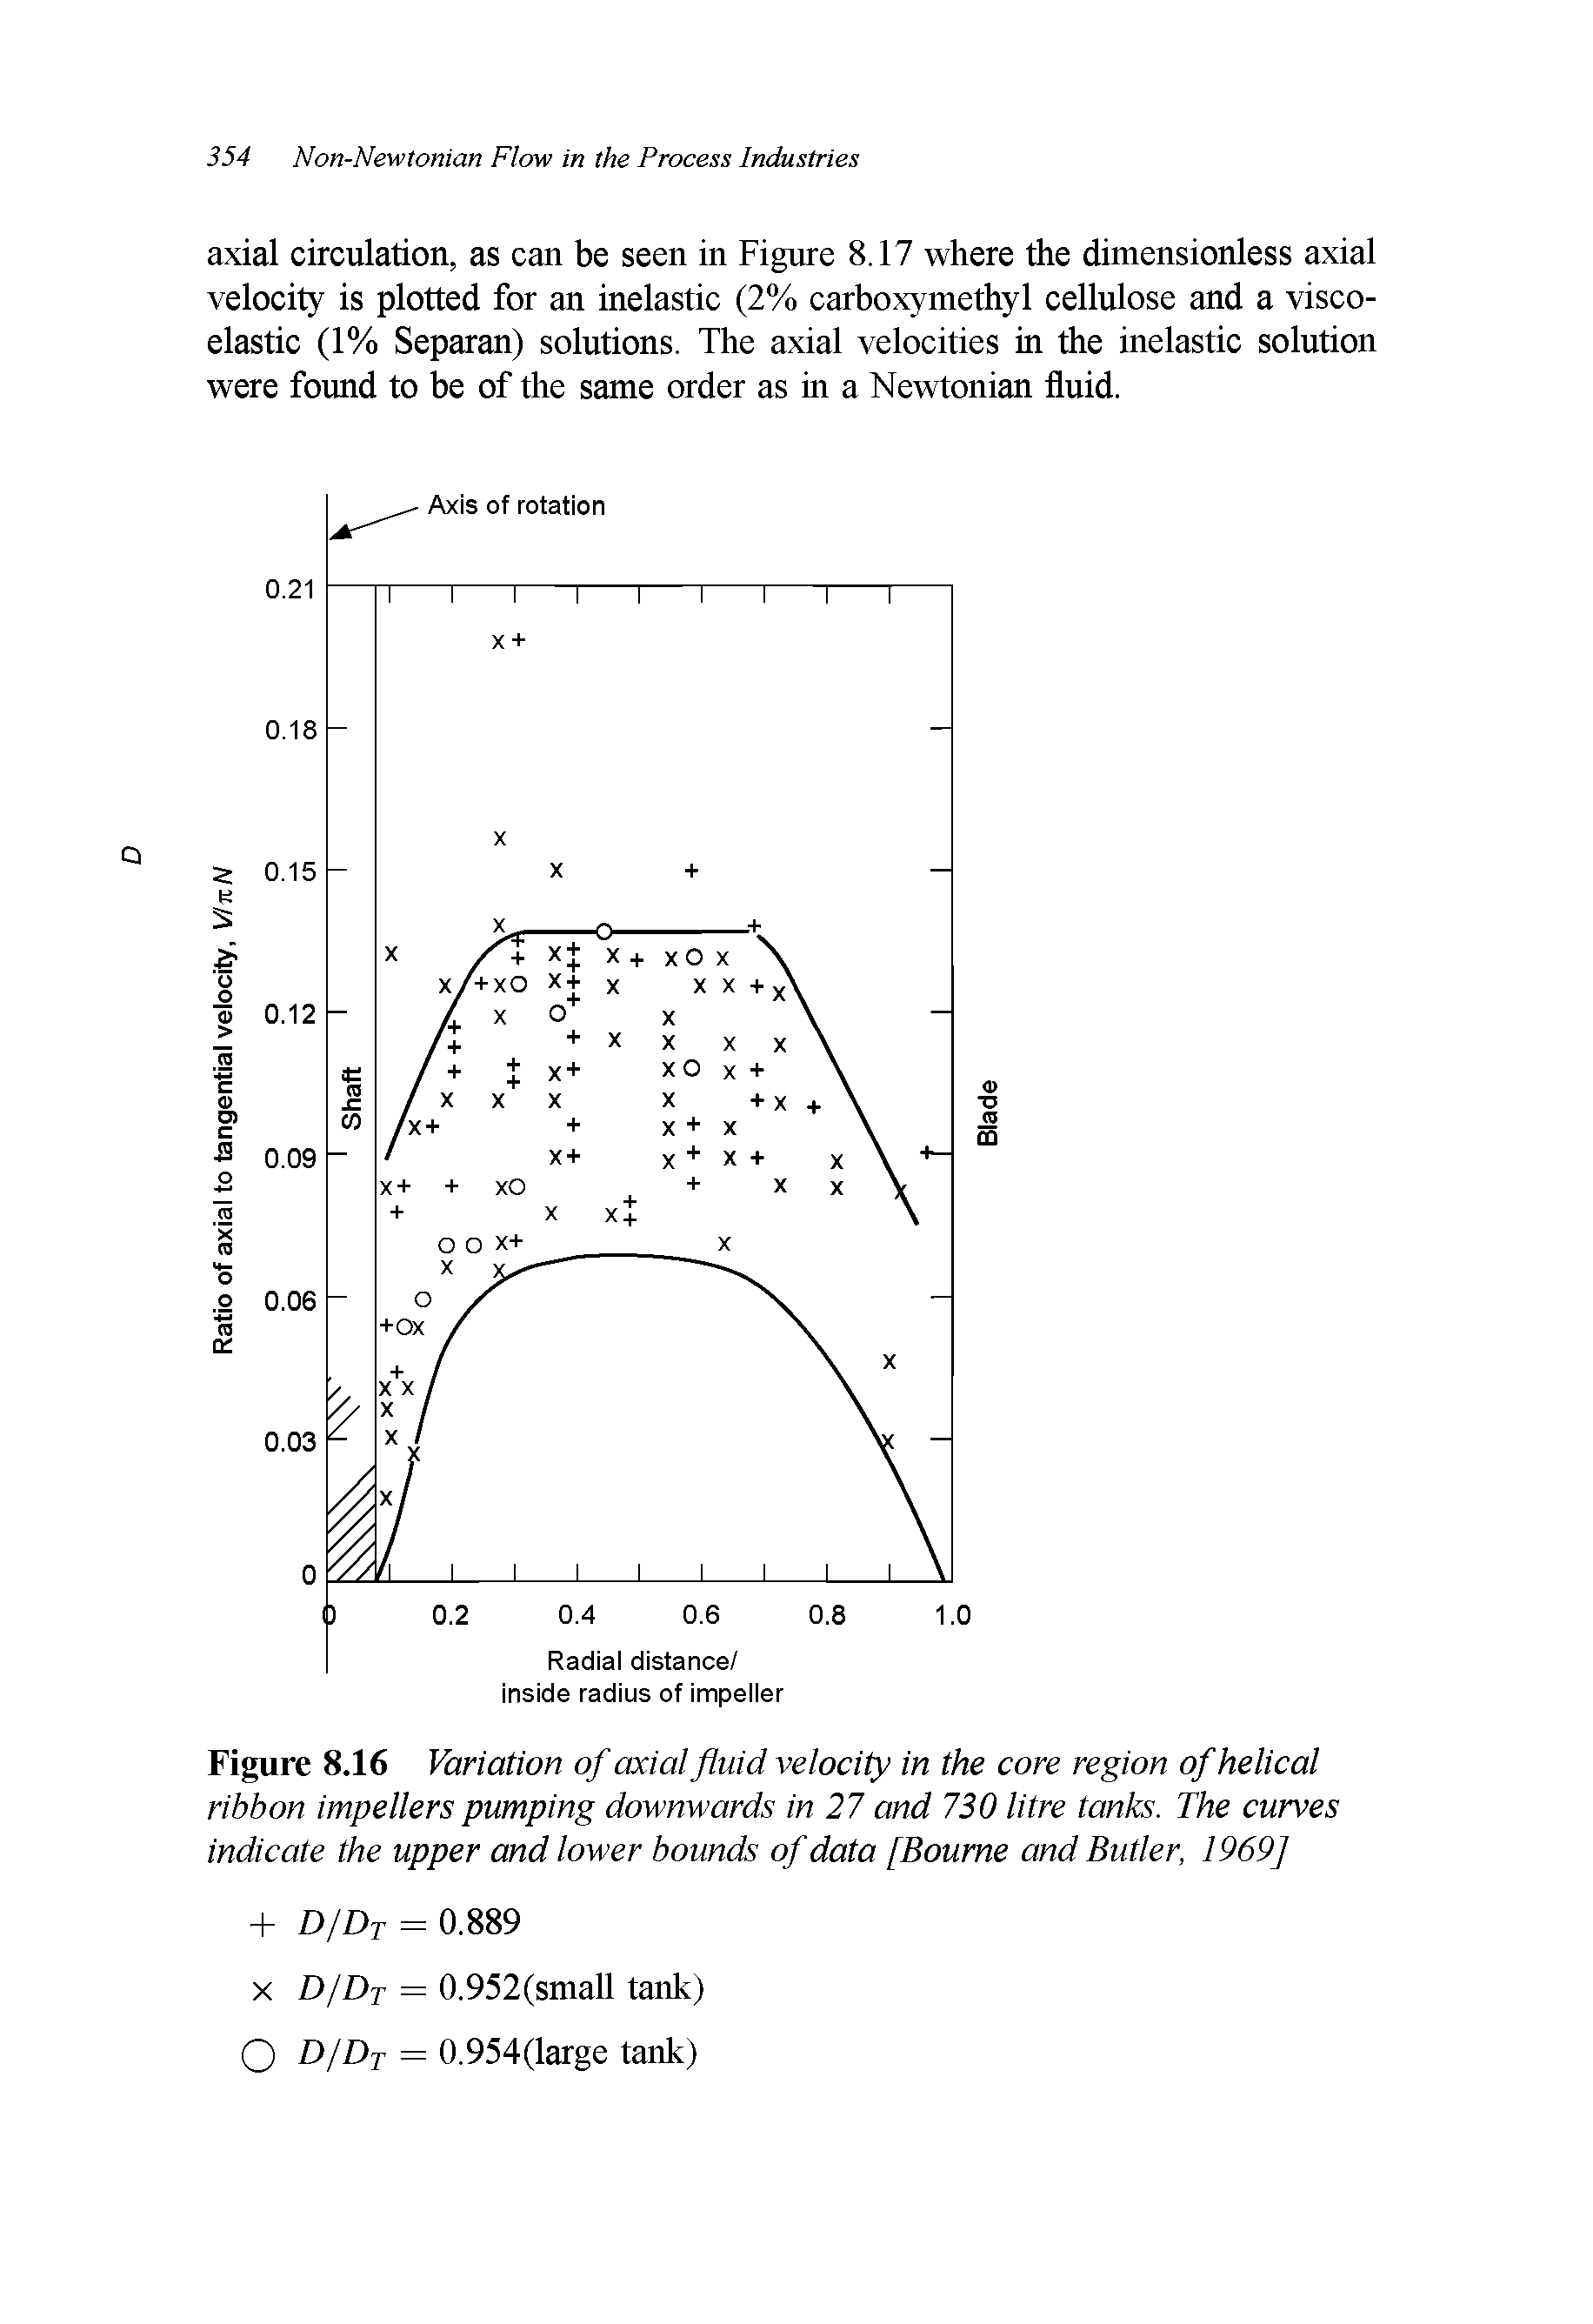 Figure 8.16 Variation of axial fluid velocity in the core region of helical ribbon impellers pumping downwards in 27 and 730 litre tanks. The curves indicate the upper and lower bounds of data [Bourne and Butler, 1969]...